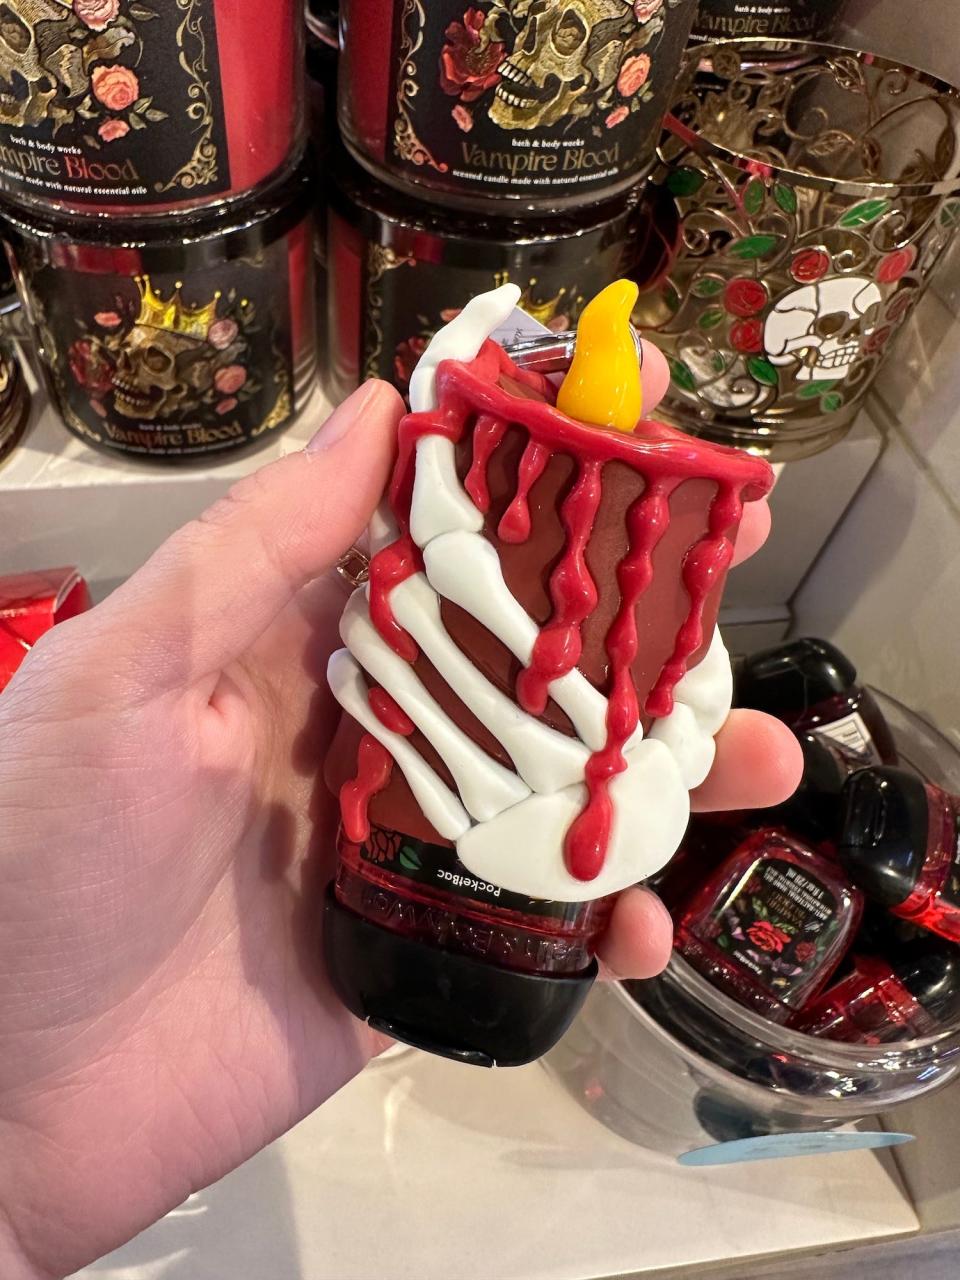 A candle-shaped PocketBac holder from Bath & Body Works.